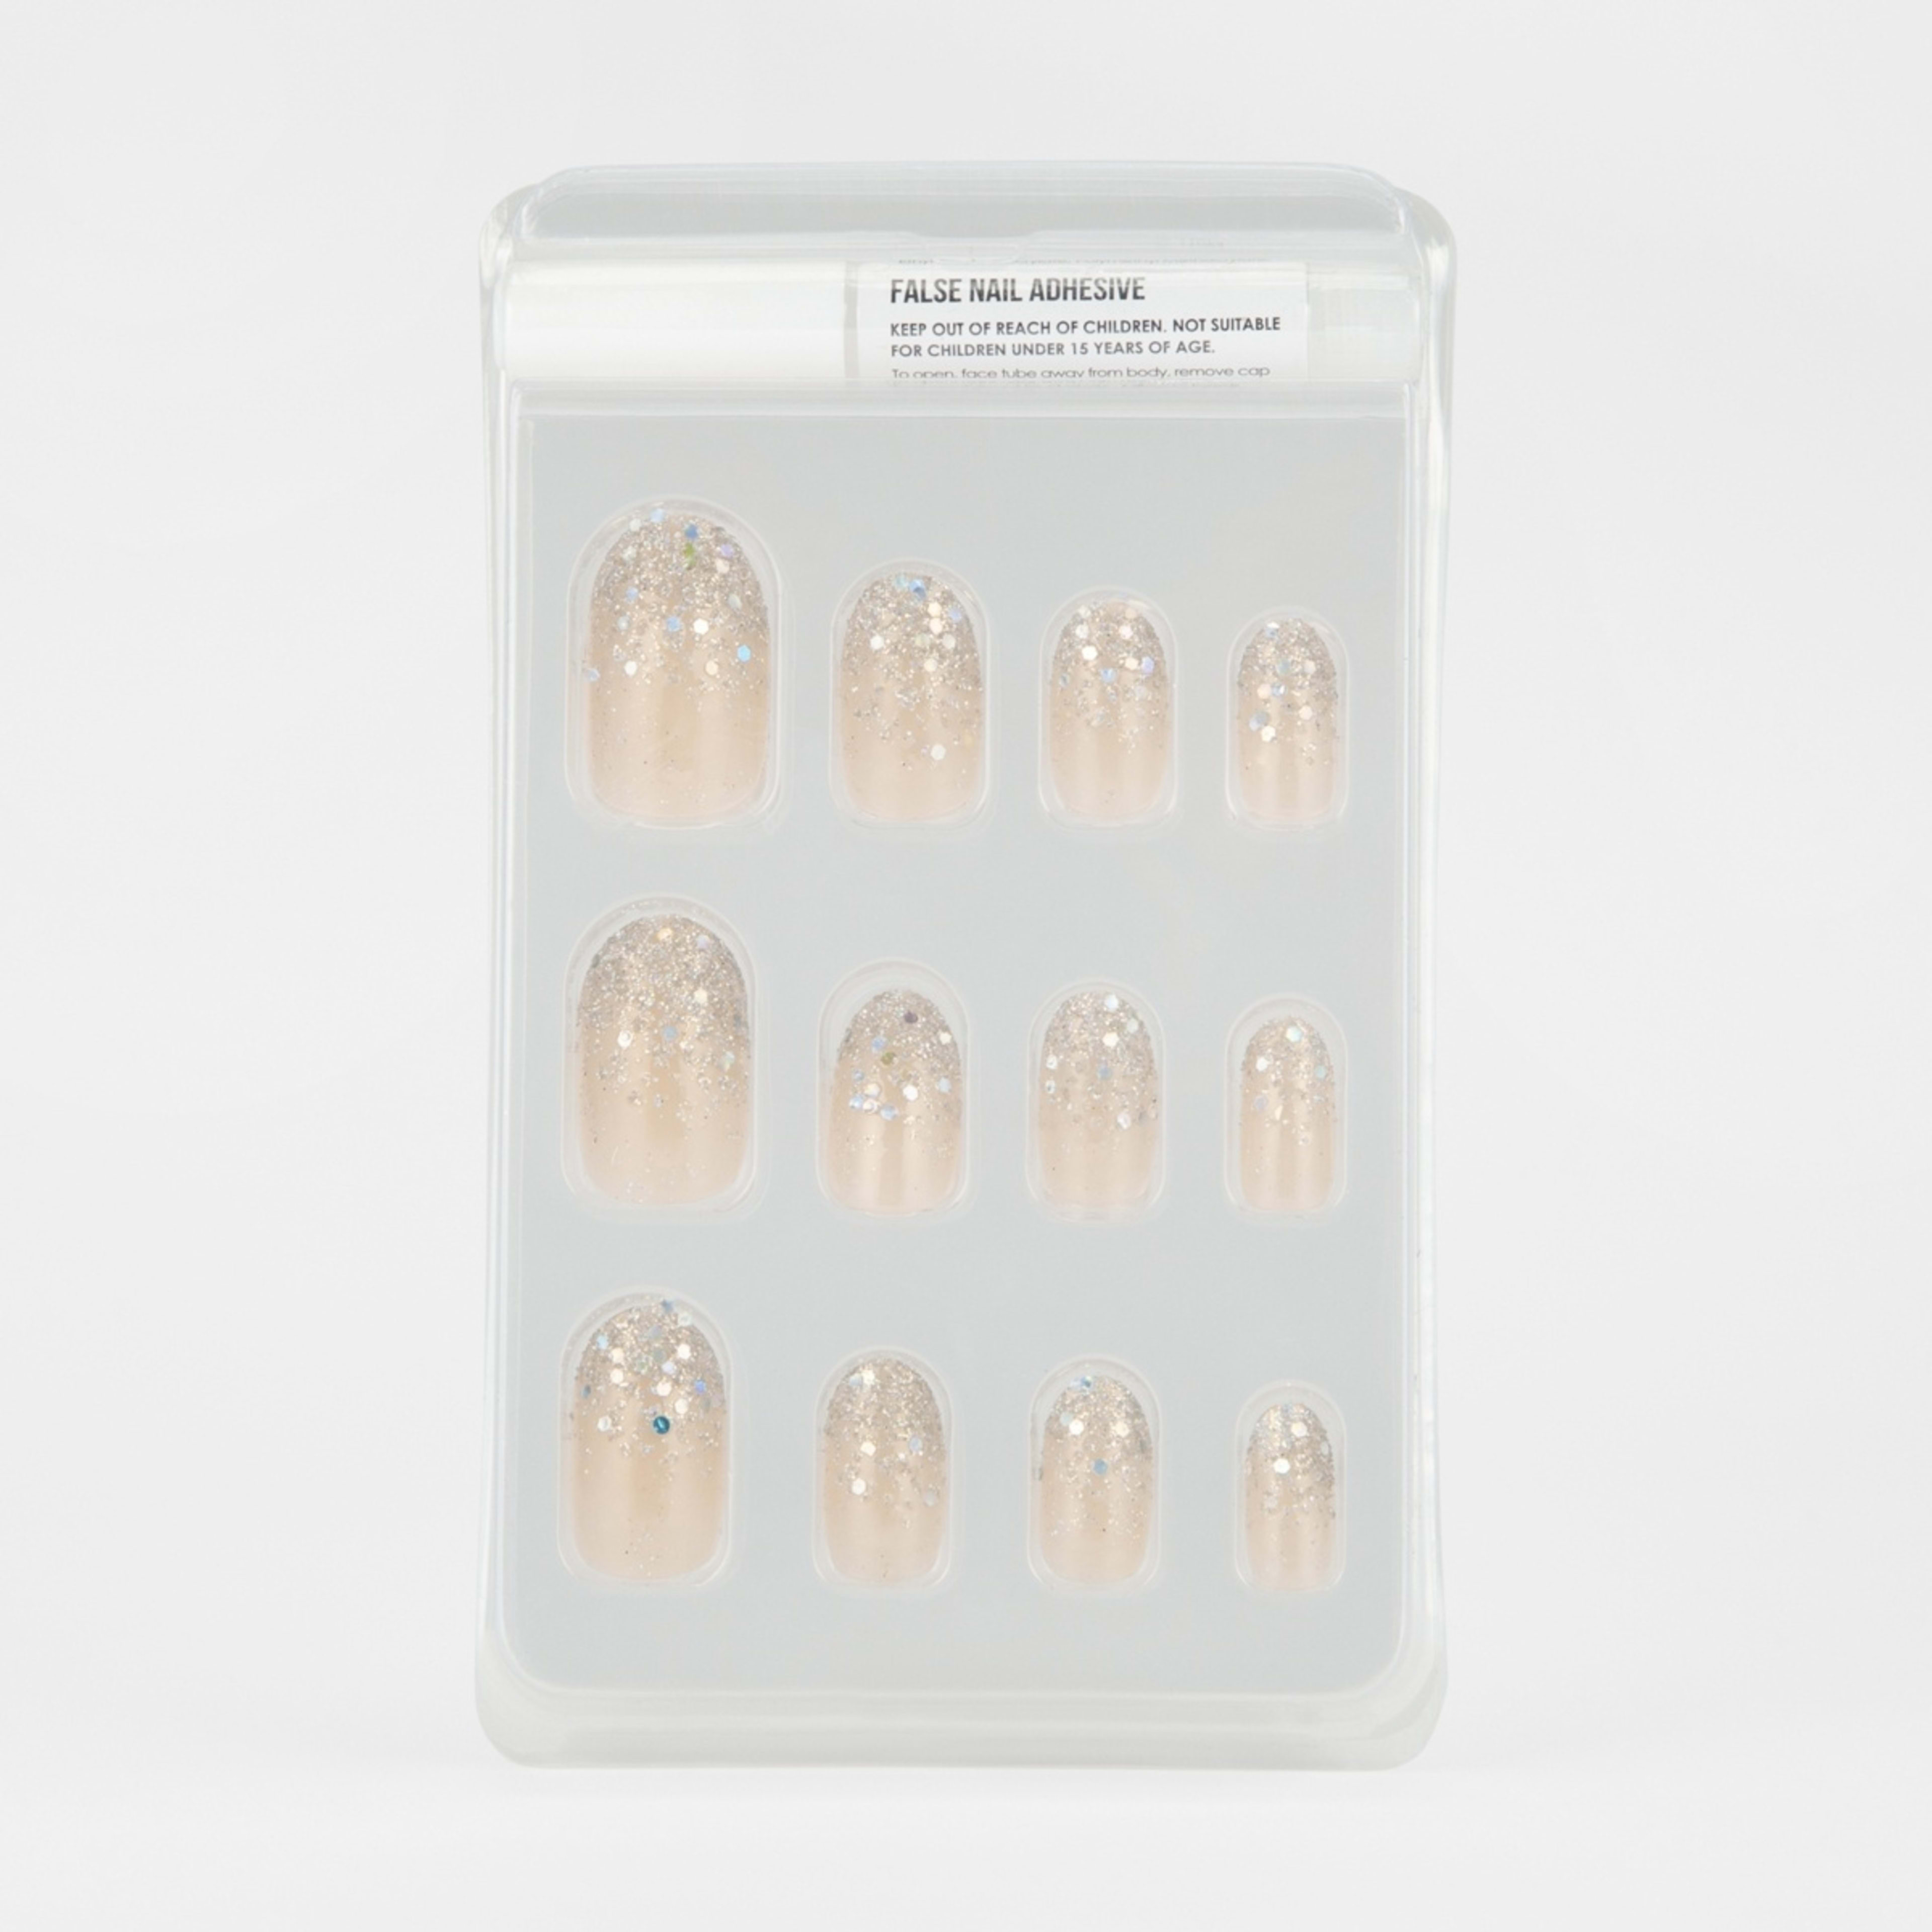 OXX Cosmetics 24 Pack False Nails with Adhesive - Oval Shape, Silver ...